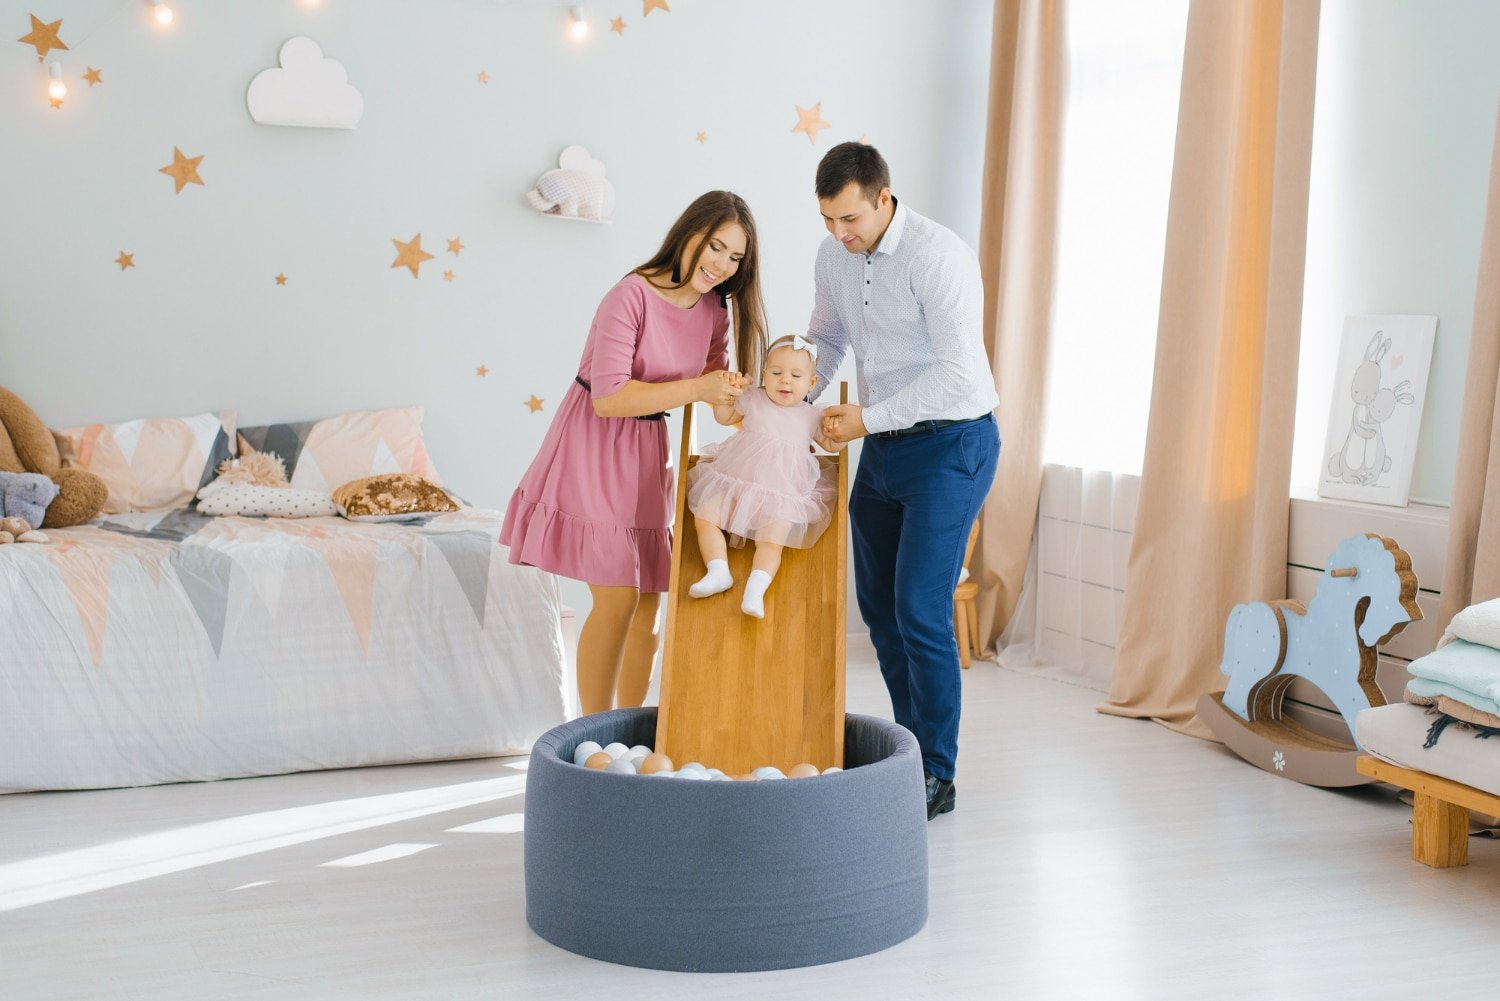 Prepare For Parenthood With Icklebubba’s Baby Gear And Nursery Furniture